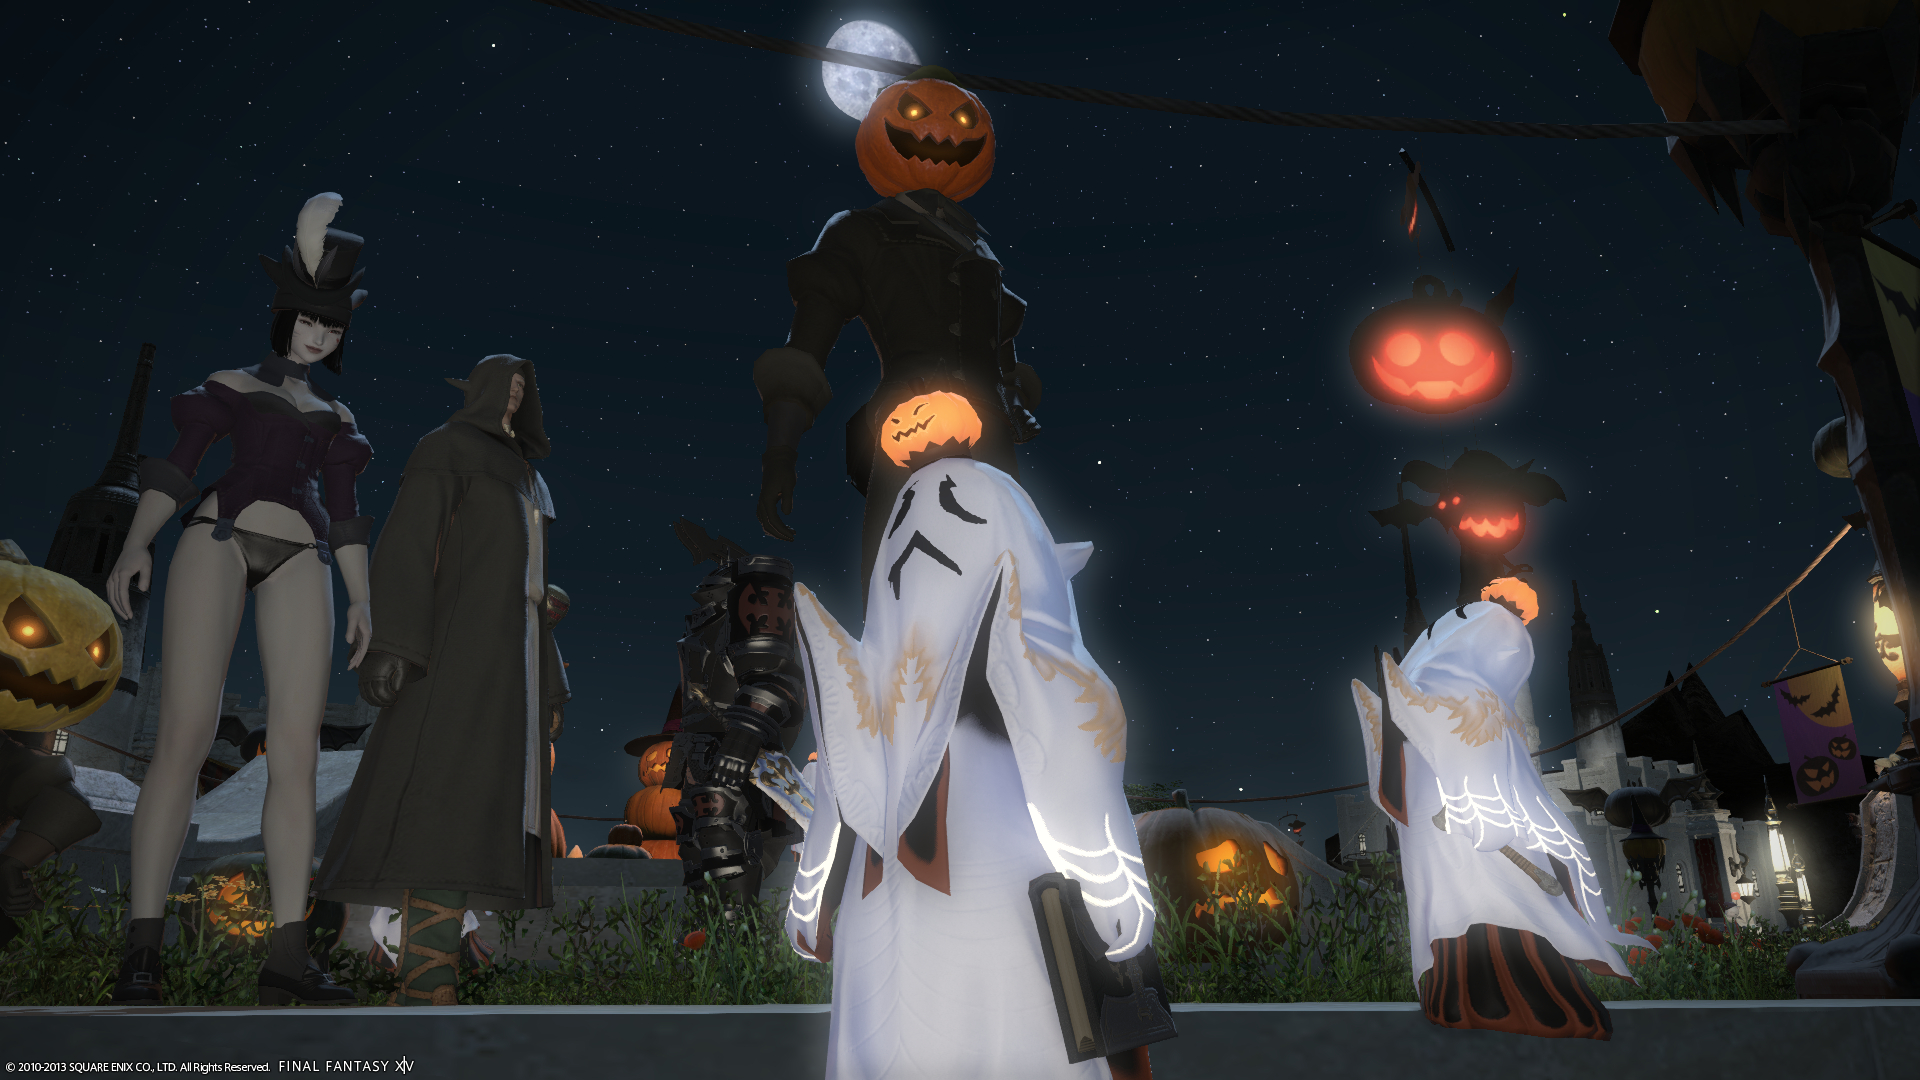 Final Fantasy 14's All Saints' Wake event begins today | PC Gamer